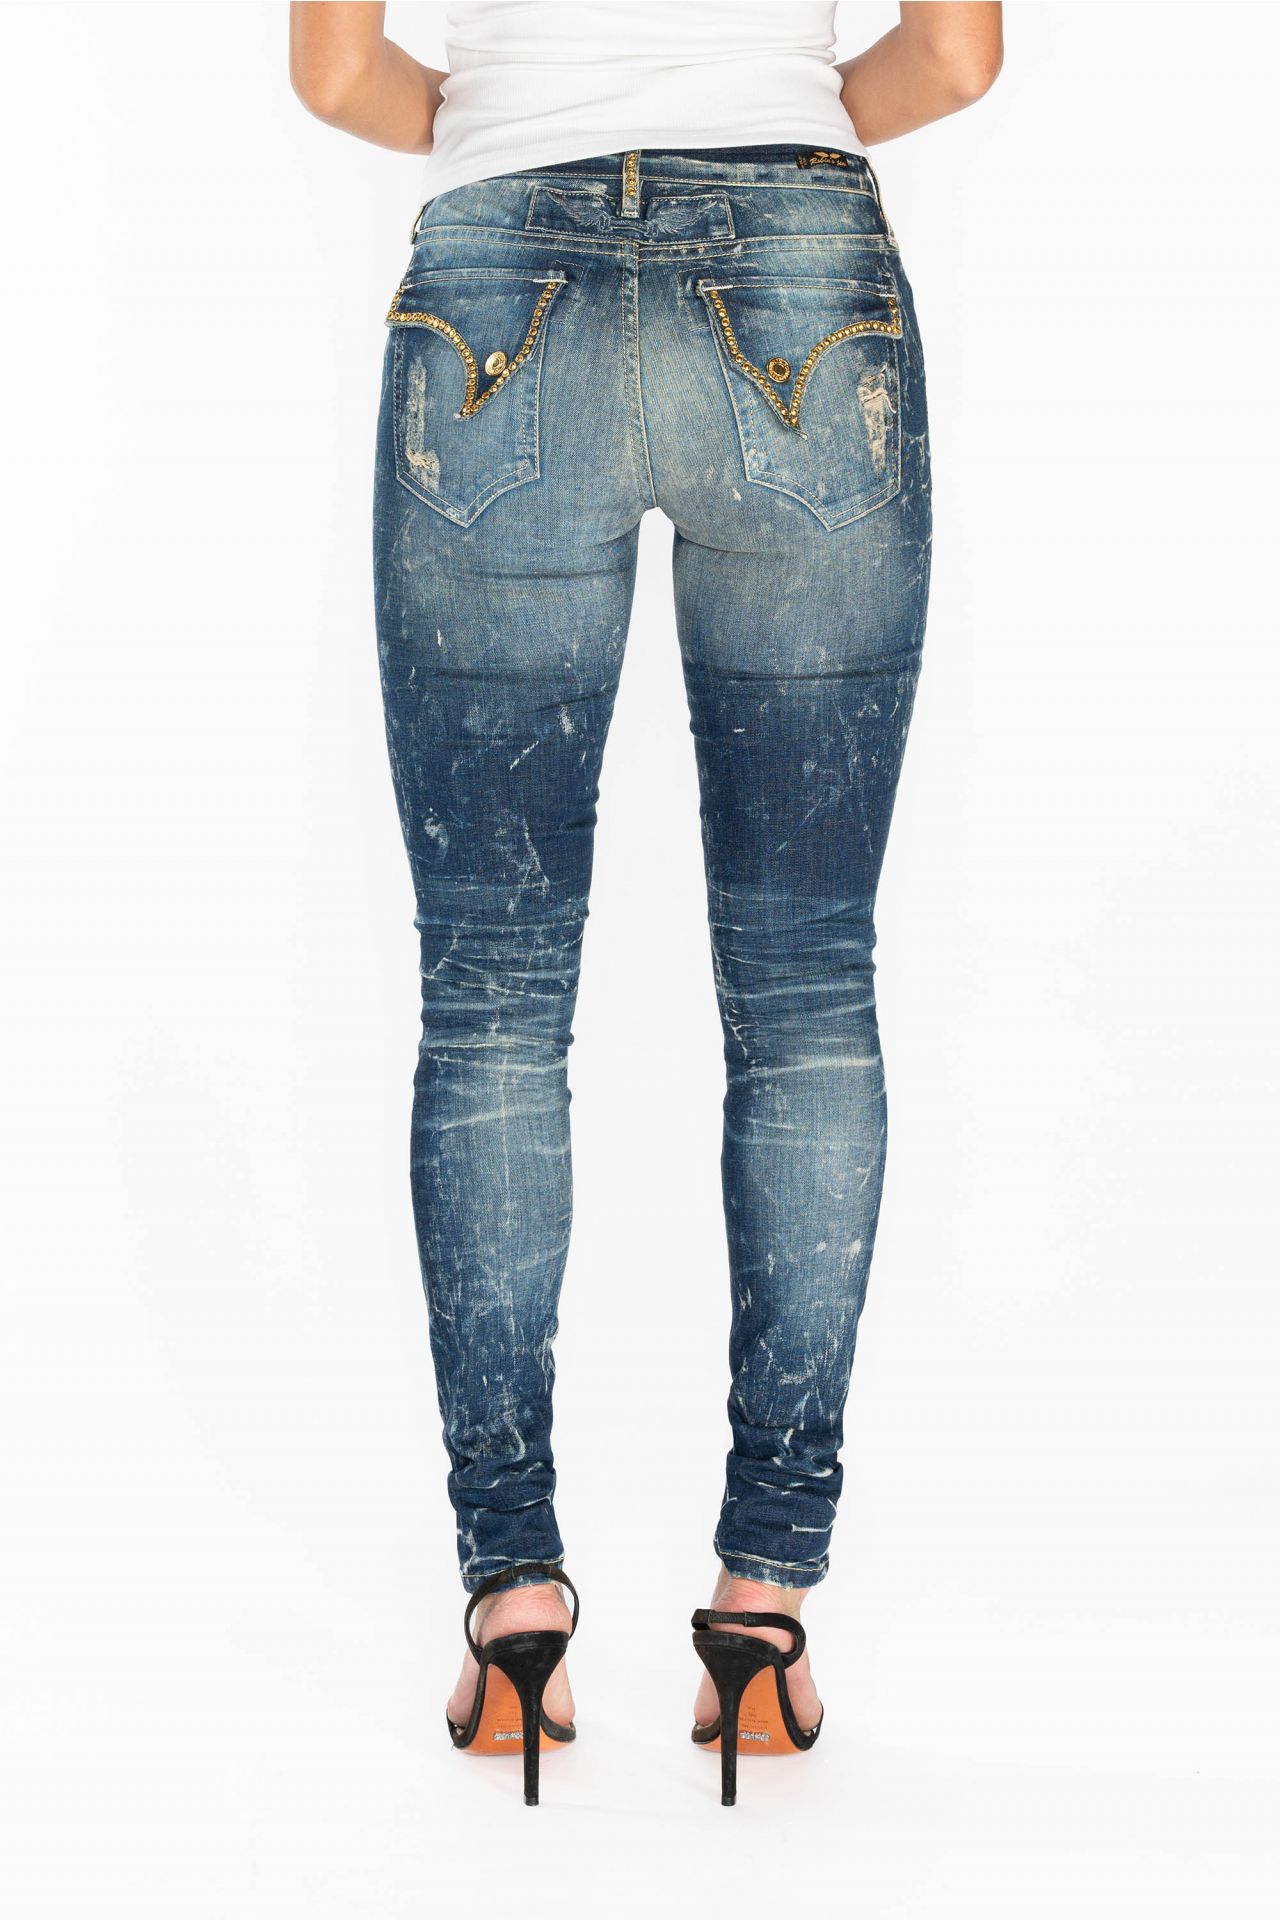 KILLER FLAP WOMENS RIPPED MID RISE SKINNY JEANS IN 4D DARK BROKEN WASH WITH CRYSTALS